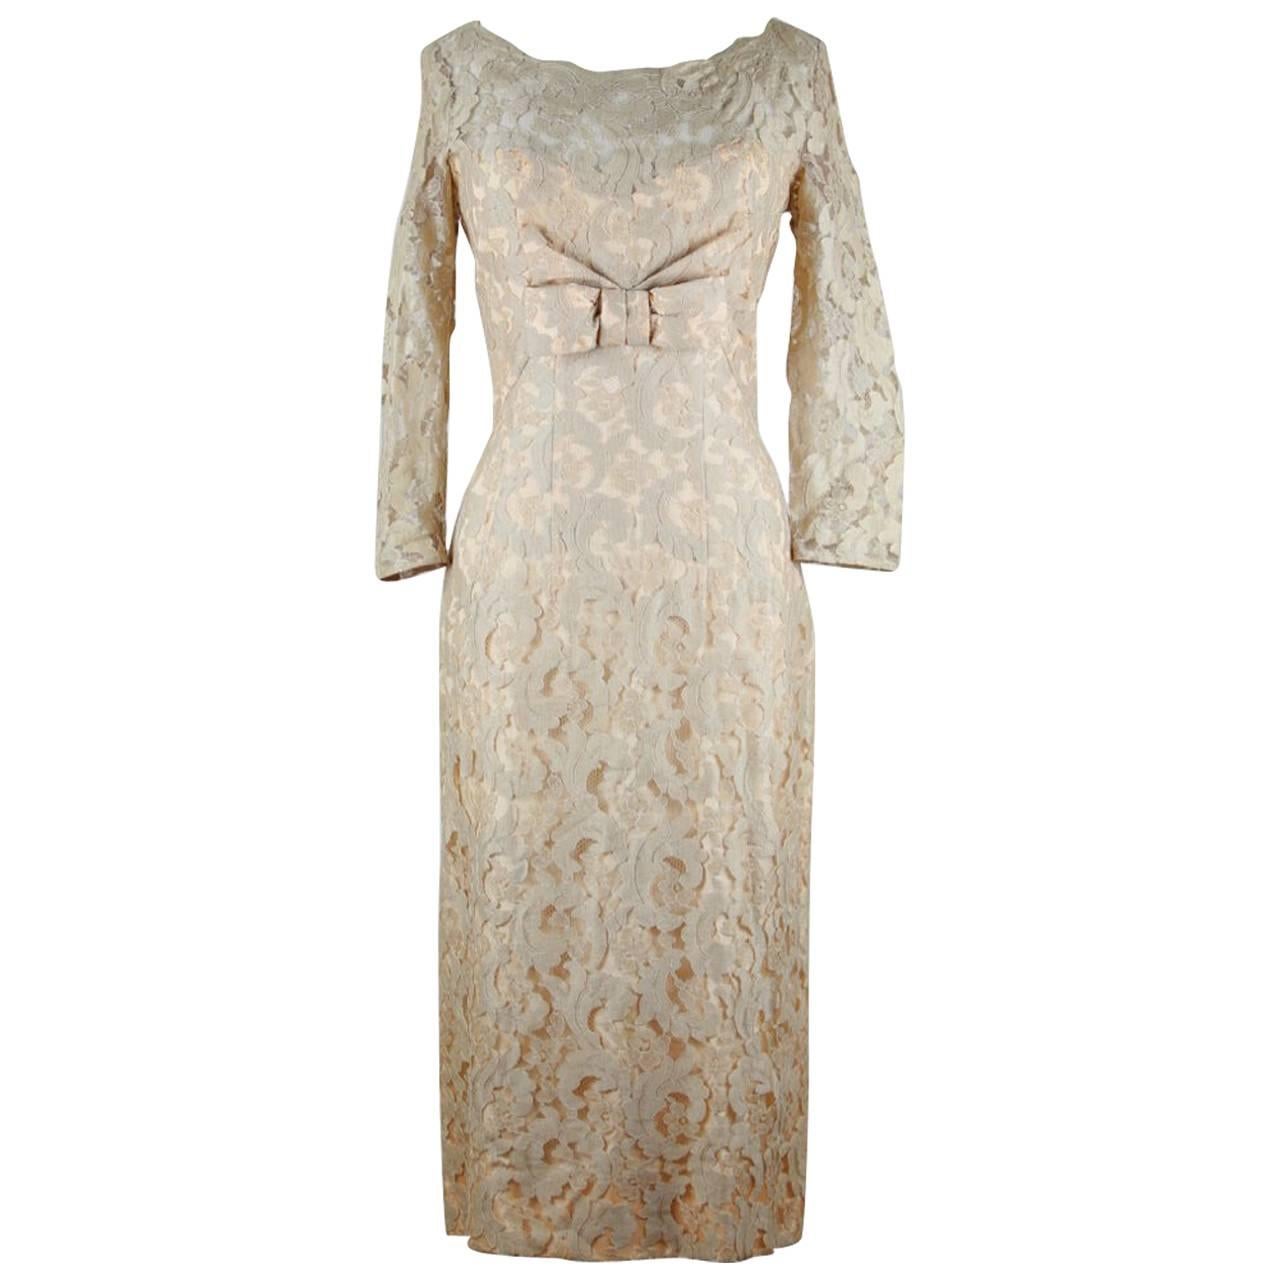 Norman Nude Champagne Floral Lace Sheath Illusion Dress With Bow Detailing 1950s